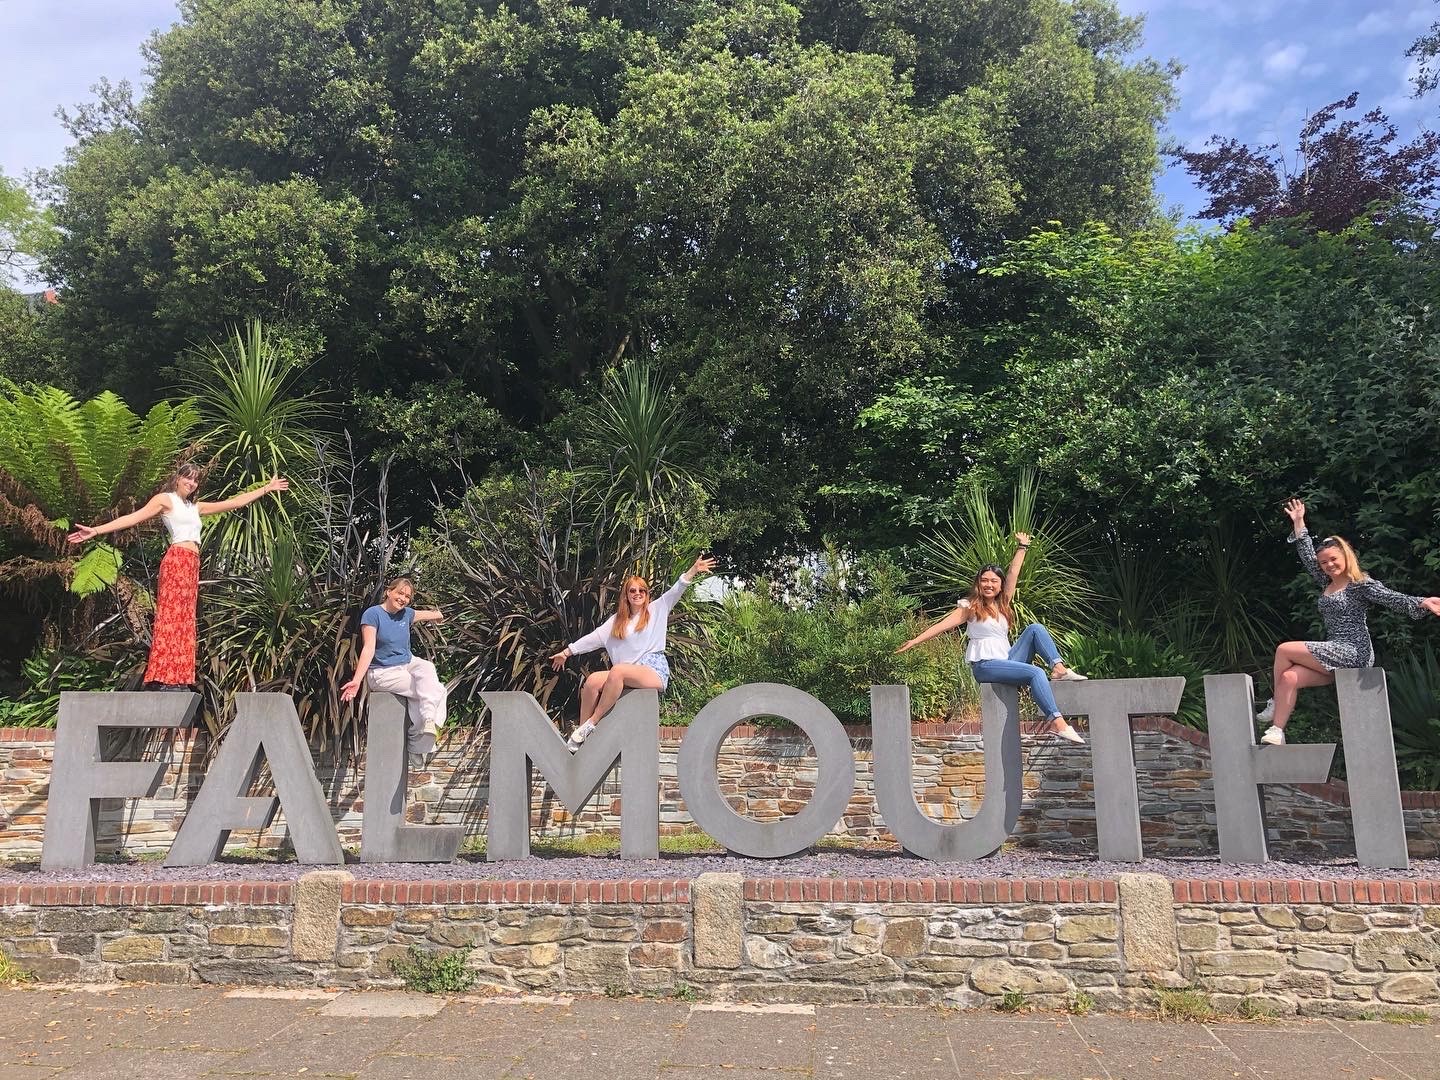 Students sit on the Falmouth sign opposite Woodlane campus - large, grey concrete letters that spell out 'Falmouth'